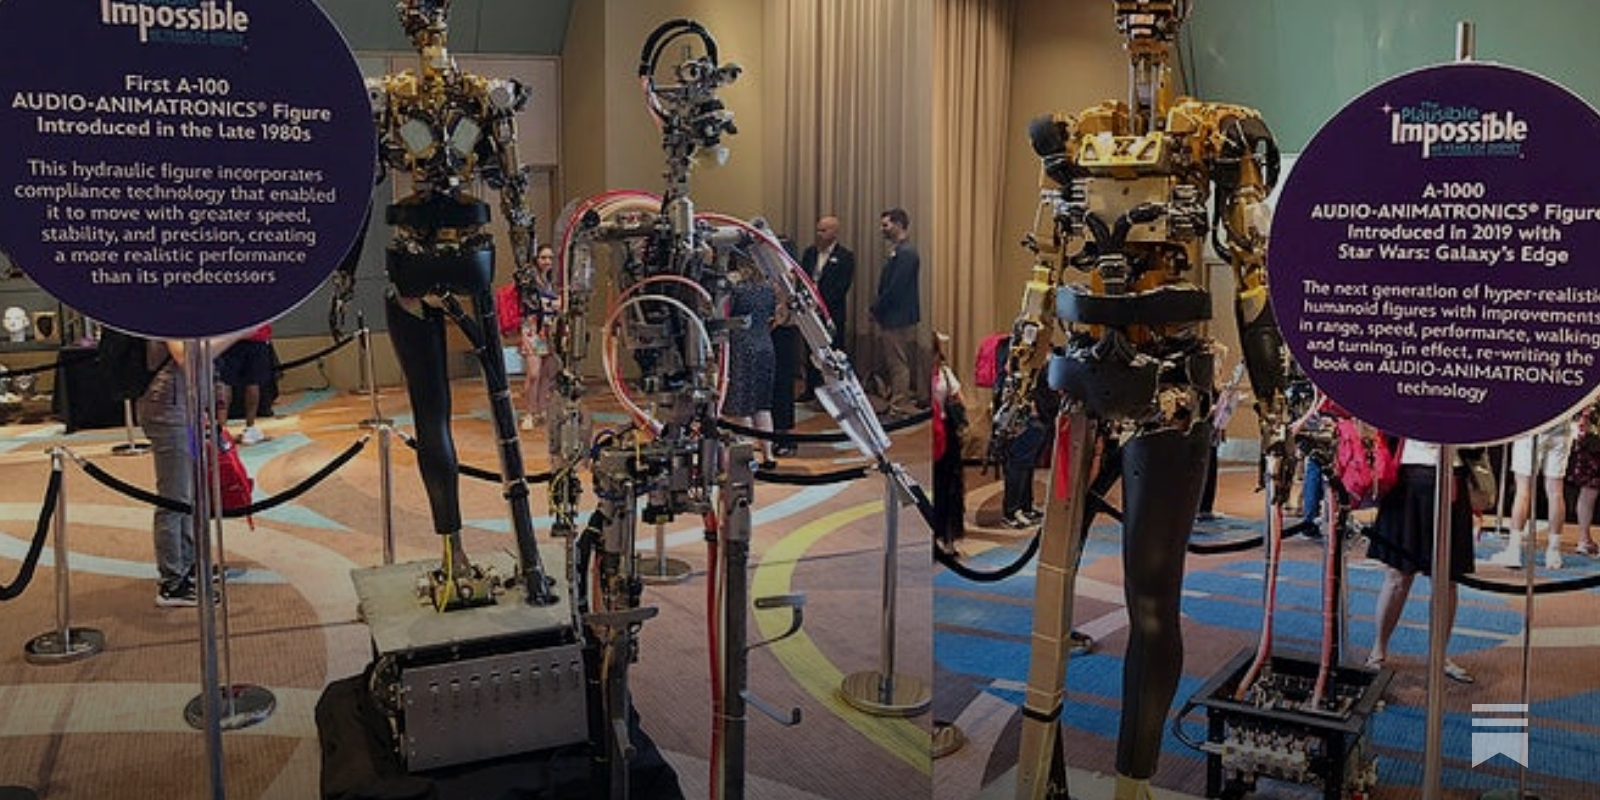 Great moments with Audio-Animatronics - by Arthur Levine